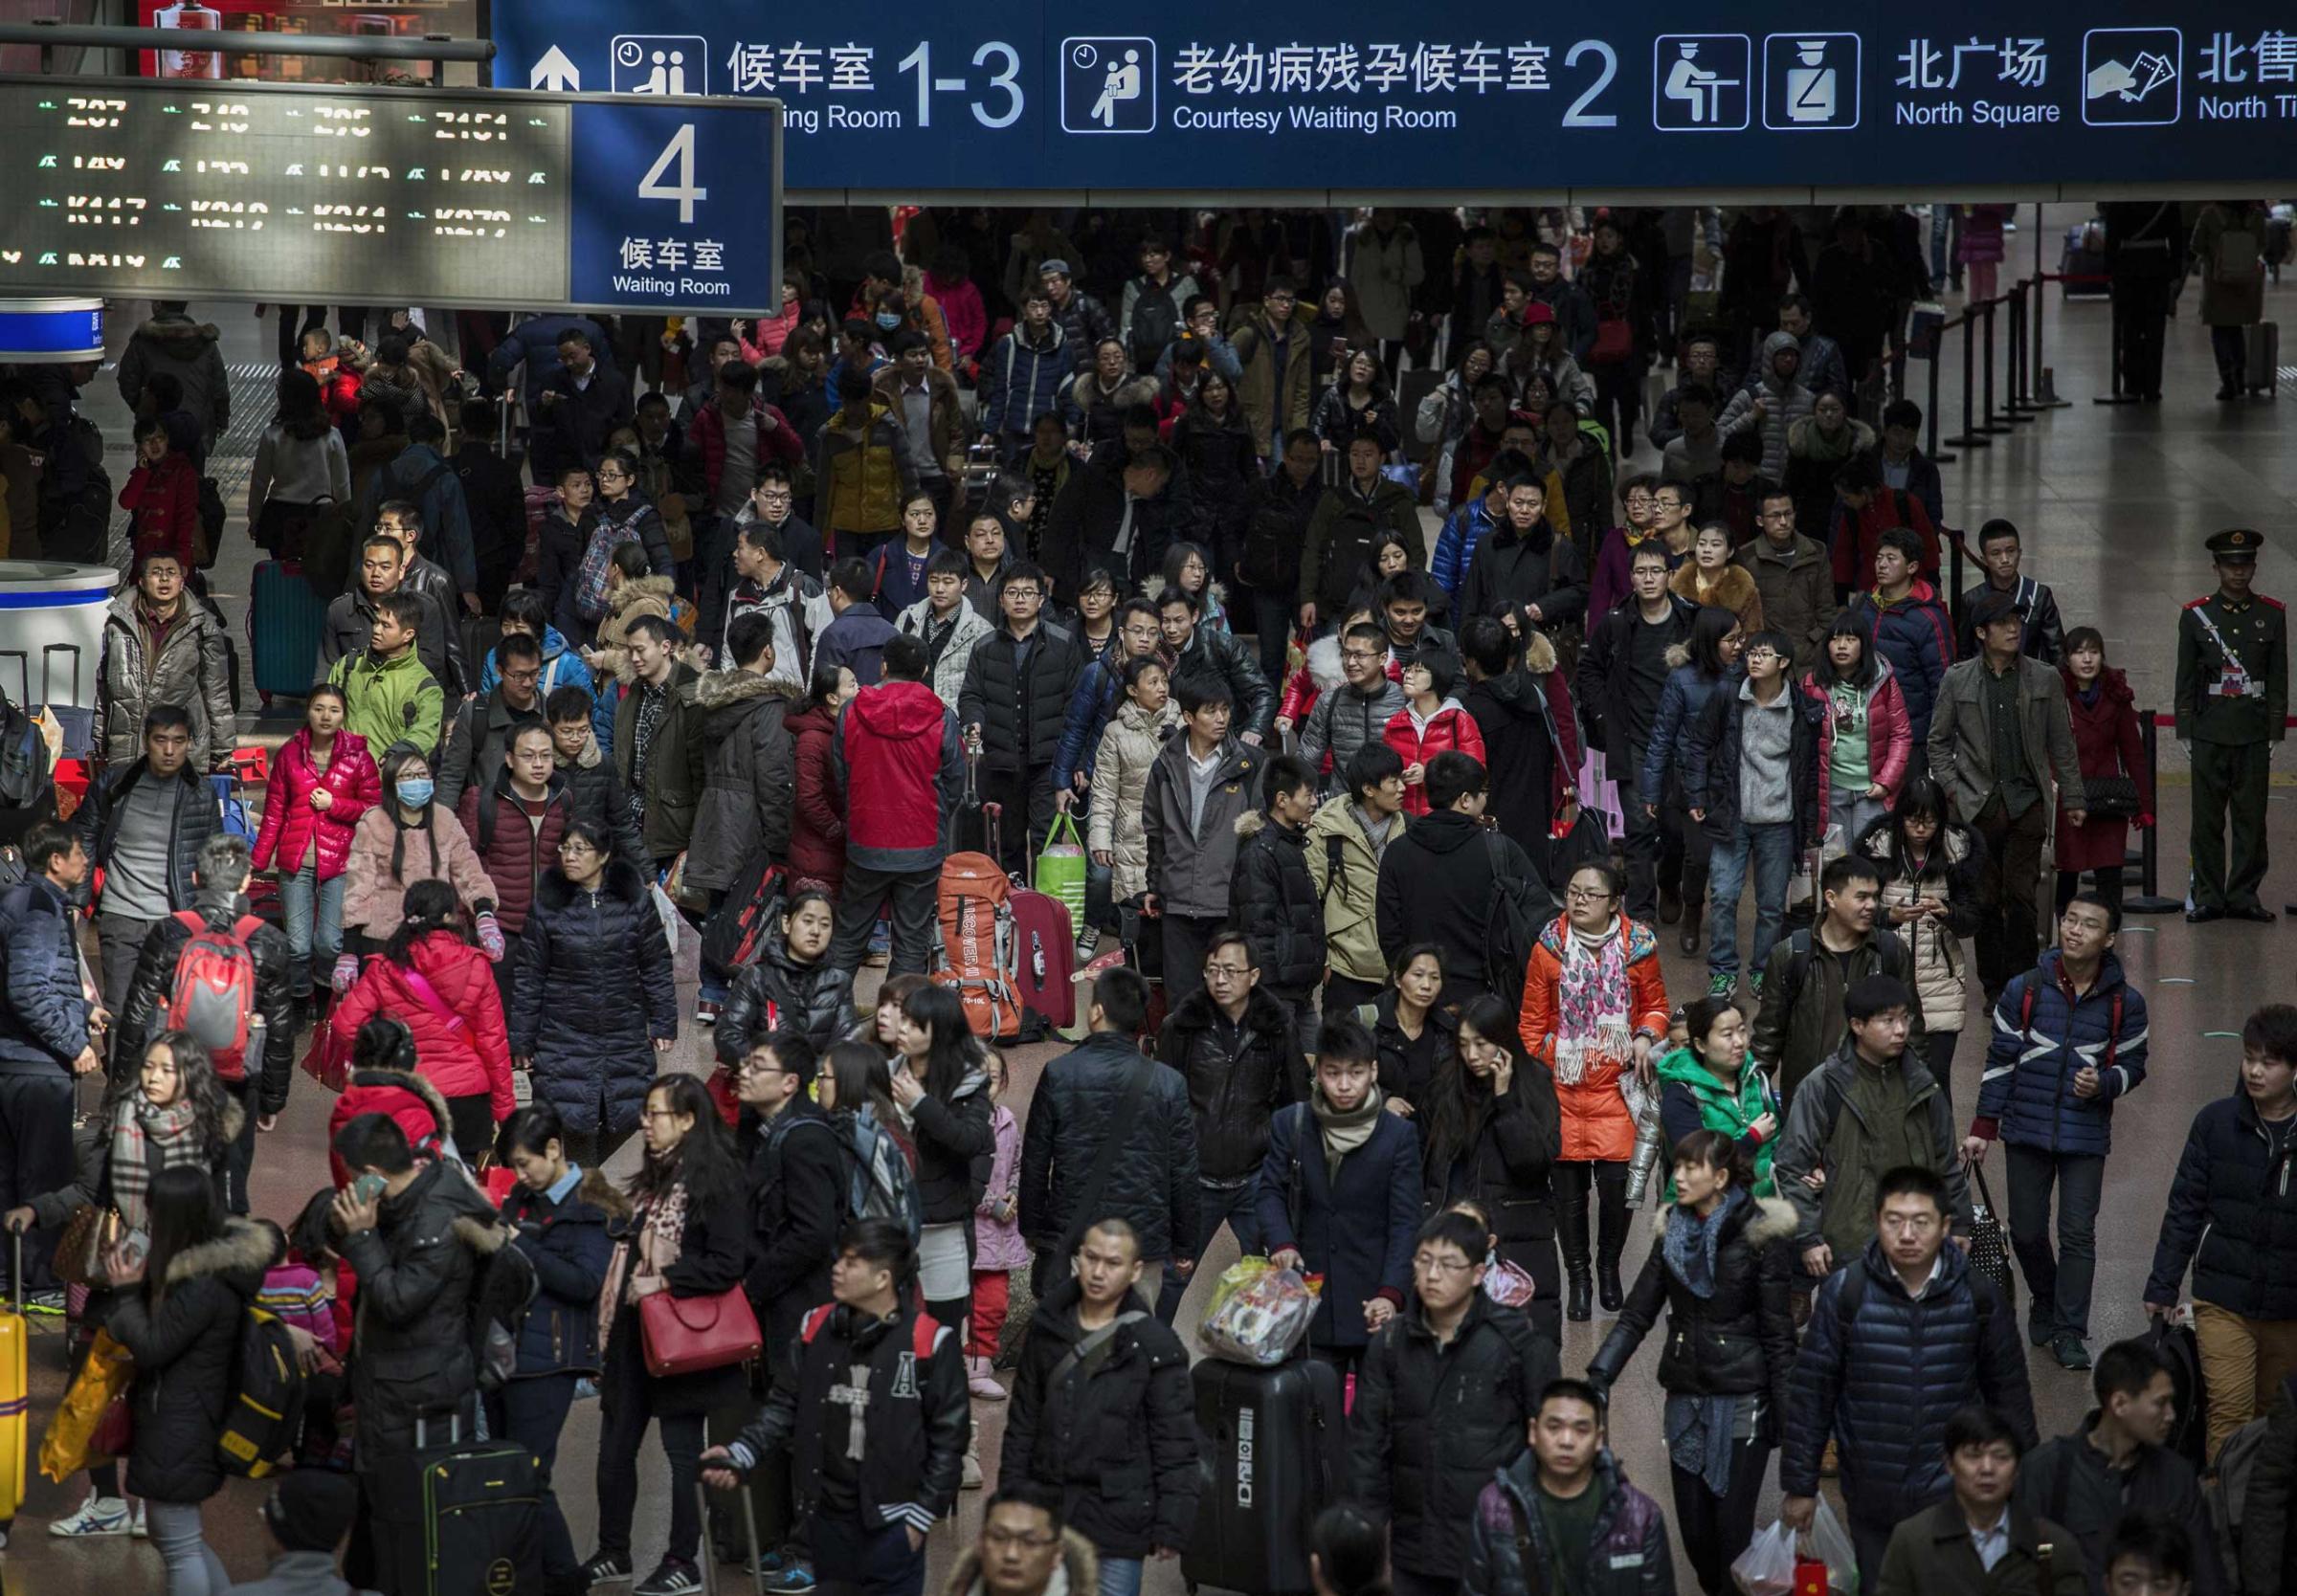 Travelers crowd the station while leaving for the Spring Festival at a local railway station on Feb. 17, 2015 in Beijing.